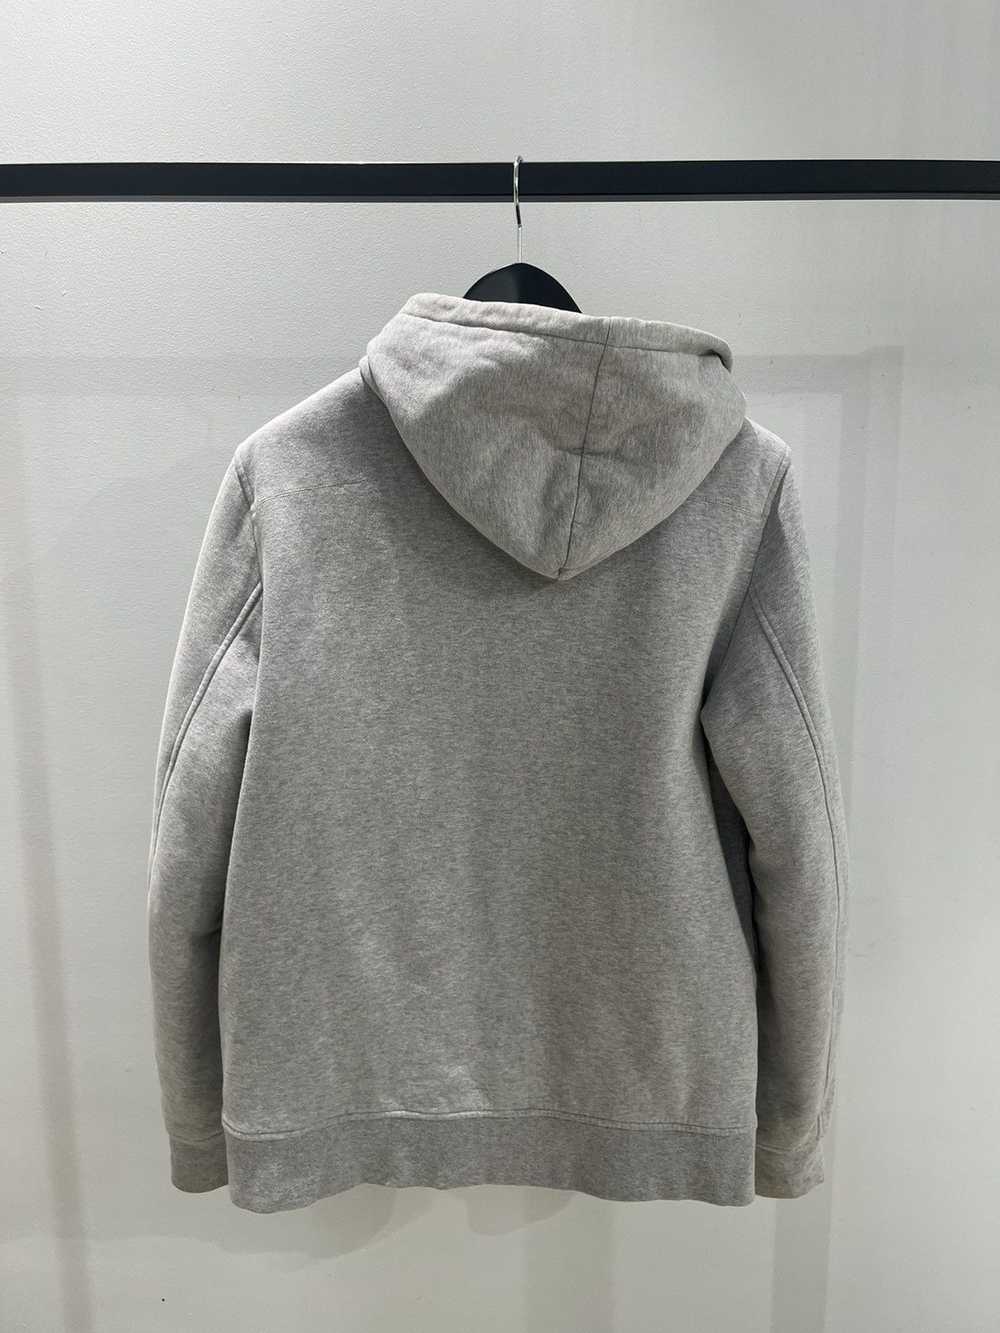 Dior Dior Homme AW09 Gray Padded Bee Hoodie Jacket - image 2